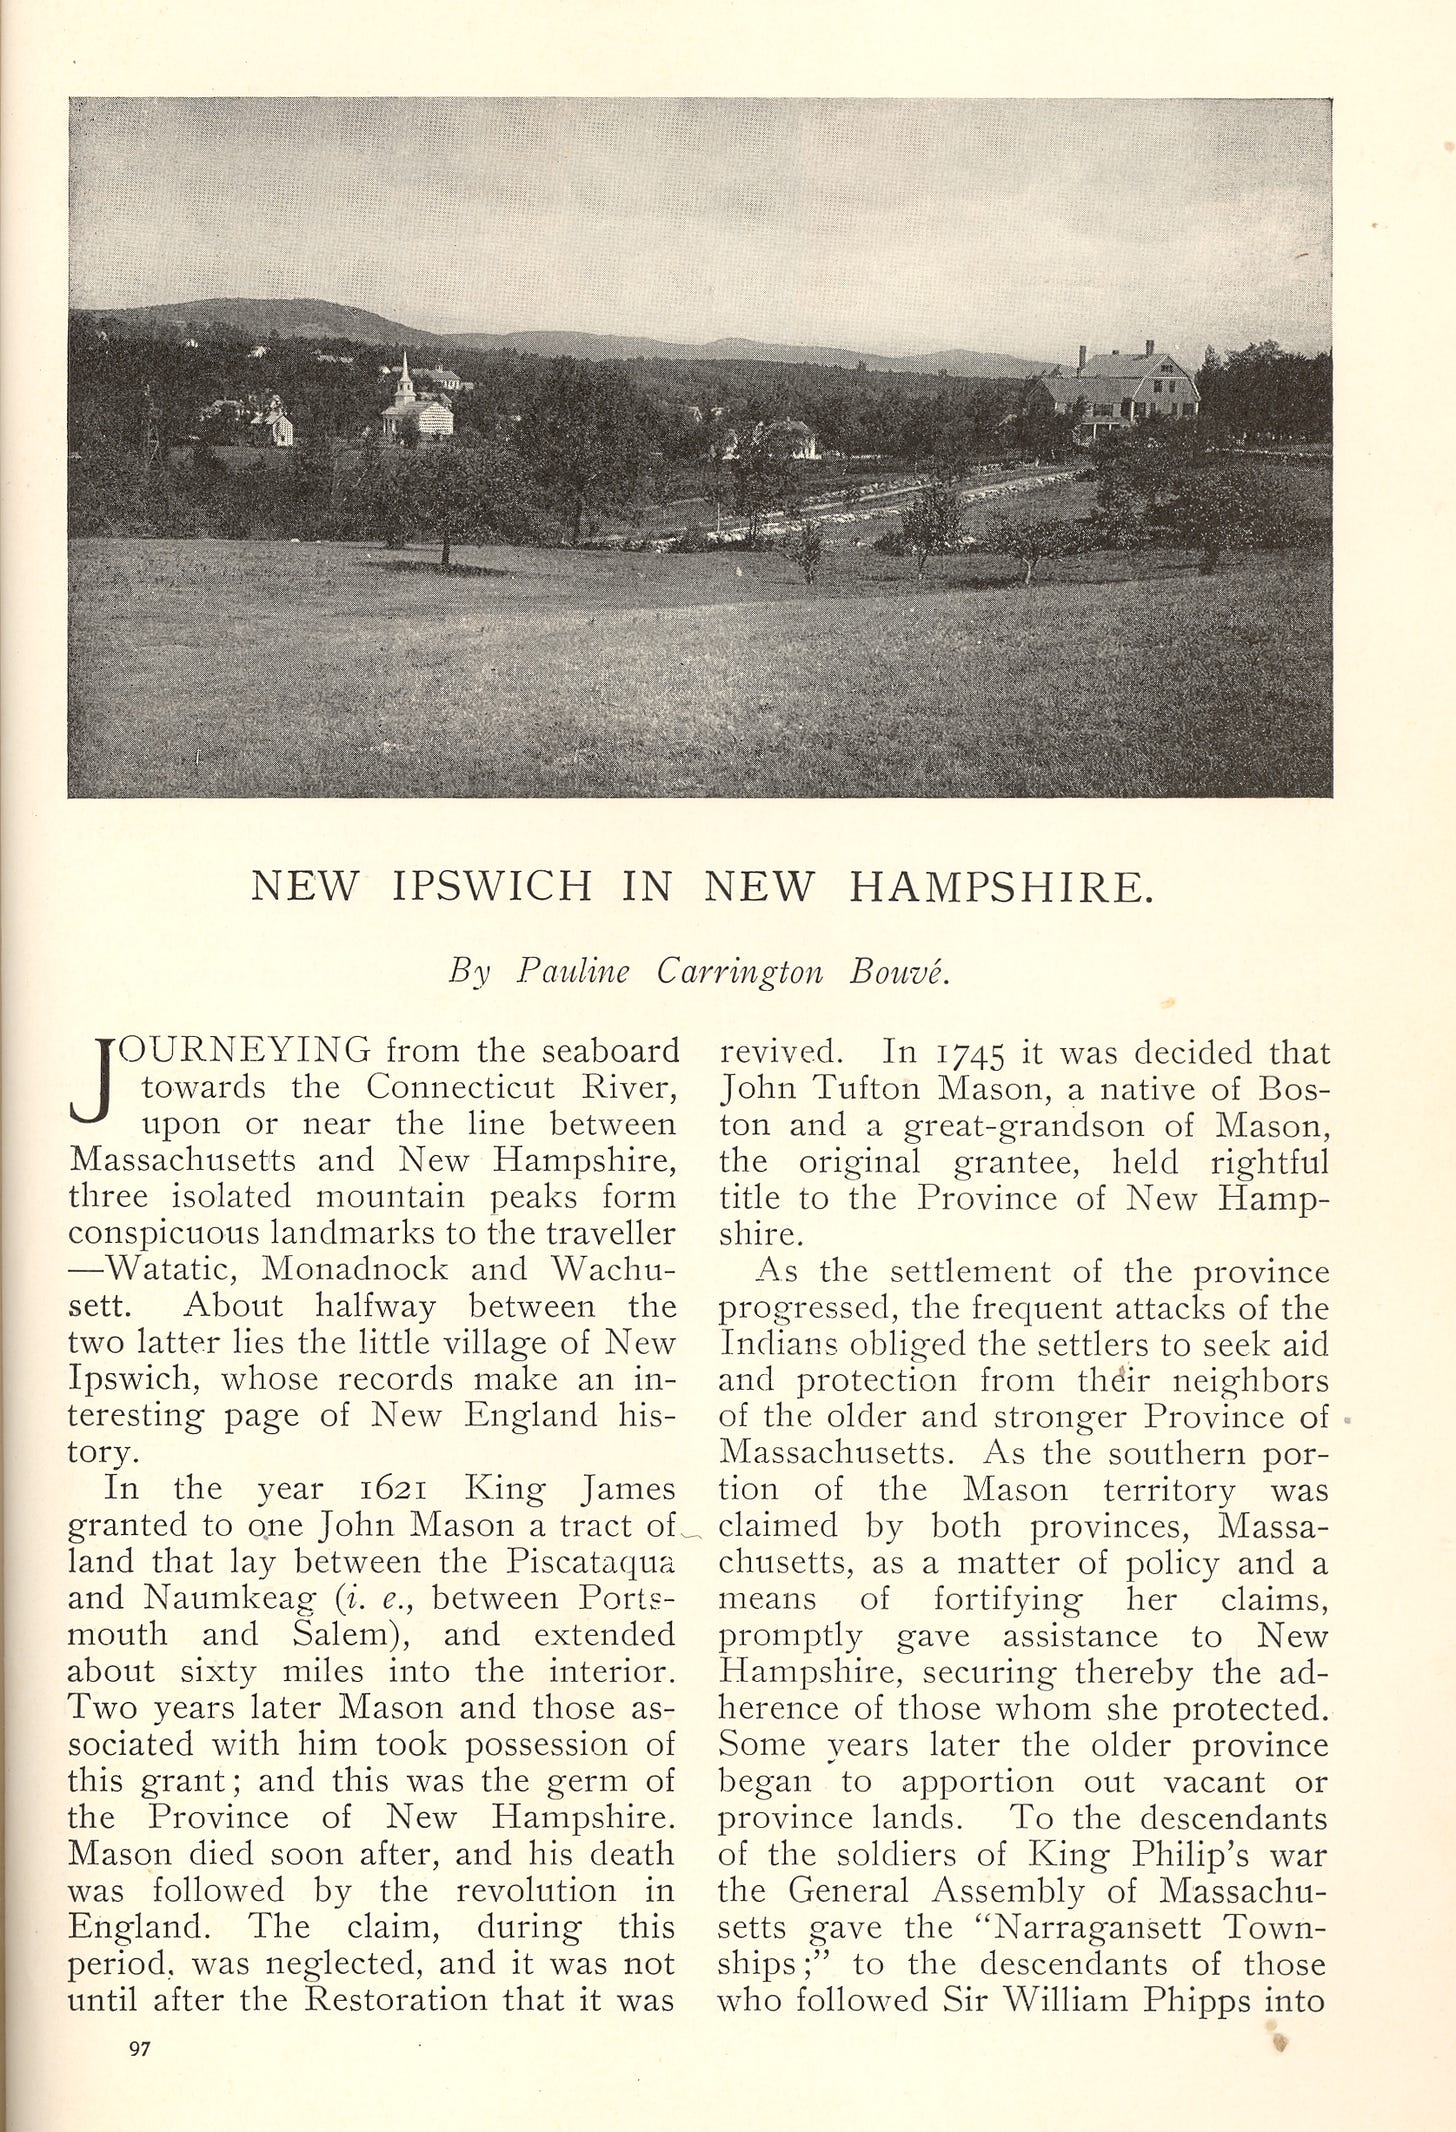 Page 97 of March 1900 edition of New England Magazine